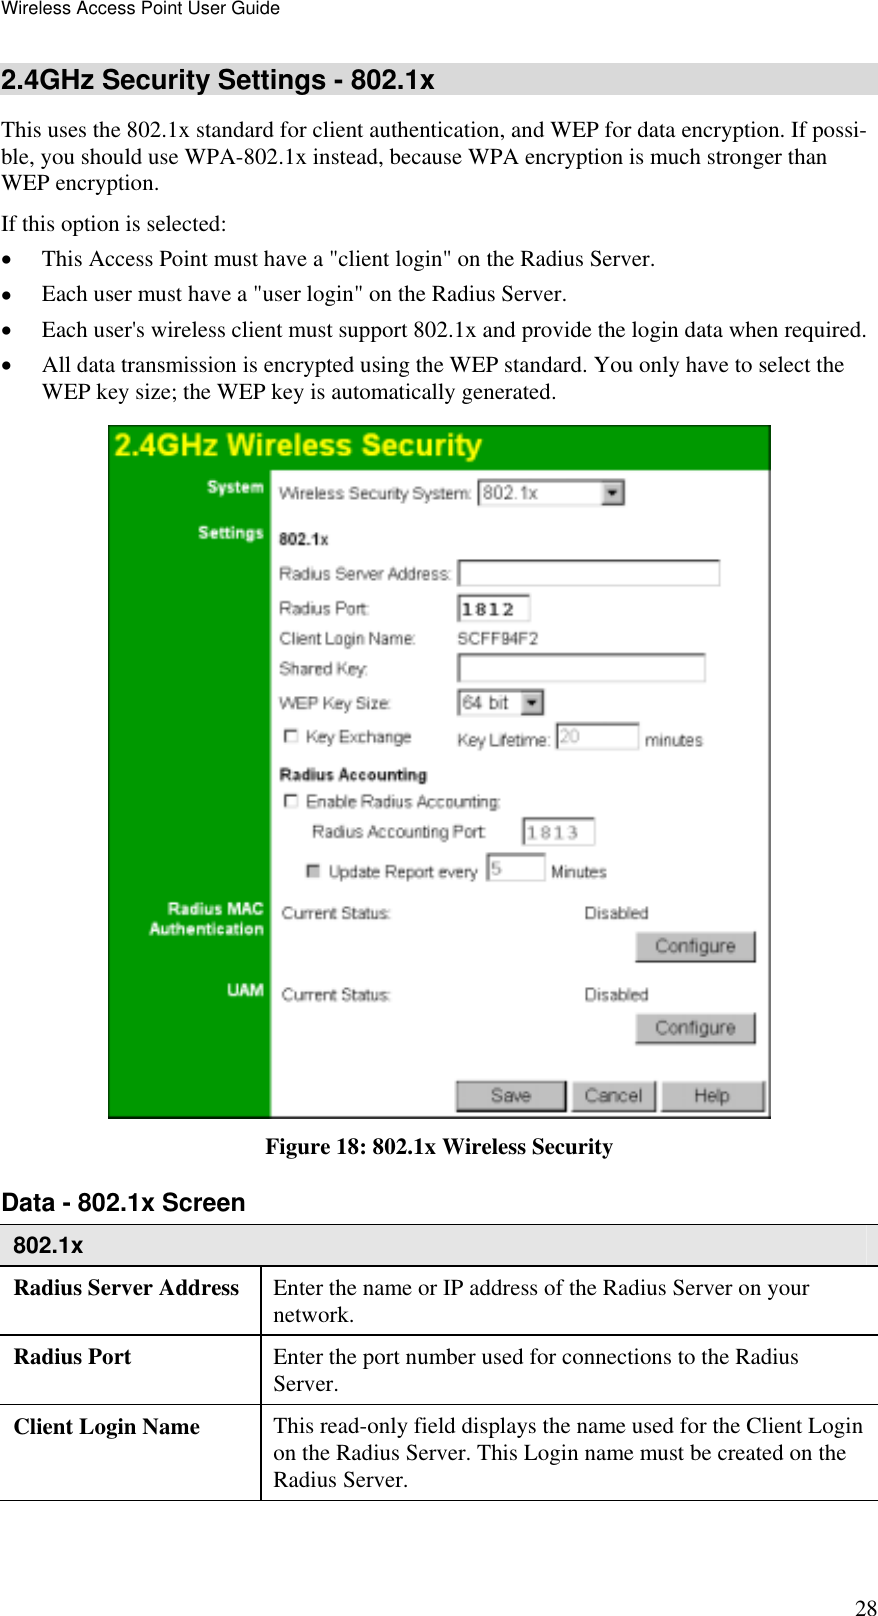 Wireless Access Point User Guide 28 2.4GHz Security Settings - 802.1x This uses the 802.1x standard for client authentication, and WEP for data encryption. If possi-ble, you should use WPA-802.1x instead, because WPA encryption is much stronger than WEP encryption.  If this option is selected: •  This Access Point must have a &quot;client login&quot; on the Radius Server.  •  Each user must have a &quot;user login&quot; on the Radius Server.  •  Each user&apos;s wireless client must support 802.1x and provide the login data when required.  •  All data transmission is encrypted using the WEP standard. You only have to select the WEP key size; the WEP key is automatically generated.  Figure 18: 802.1x Wireless Security Data - 802.1x Screen  802.1x Radius Server Address  Enter the name or IP address of the Radius Server on your network. Radius Port  Enter the port number used for connections to the Radius Server. Client Login Name  This read-only field displays the name used for the Client Login on the Radius Server. This Login name must be created on the Radius Server. 